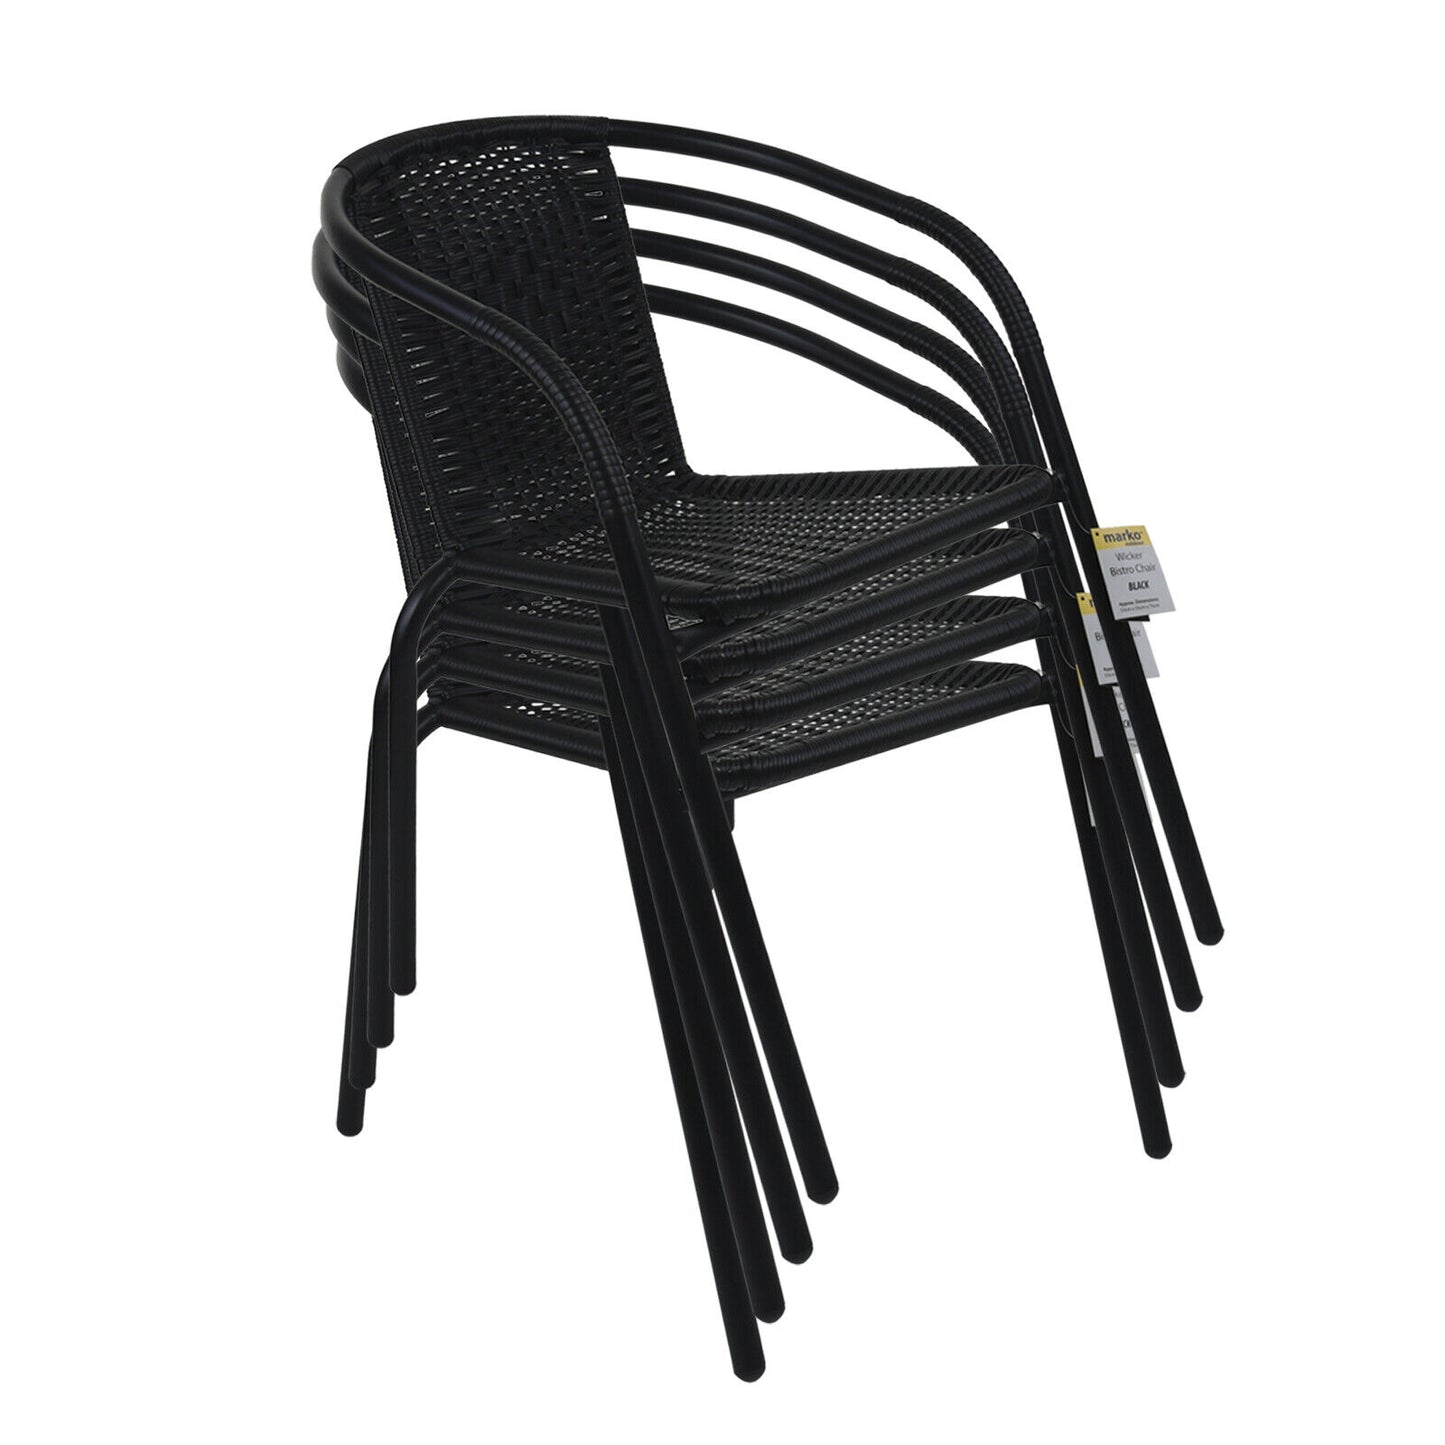 5PC Black Wicker Chairs with 60cm Black Wicker Edge Round Bistro Table